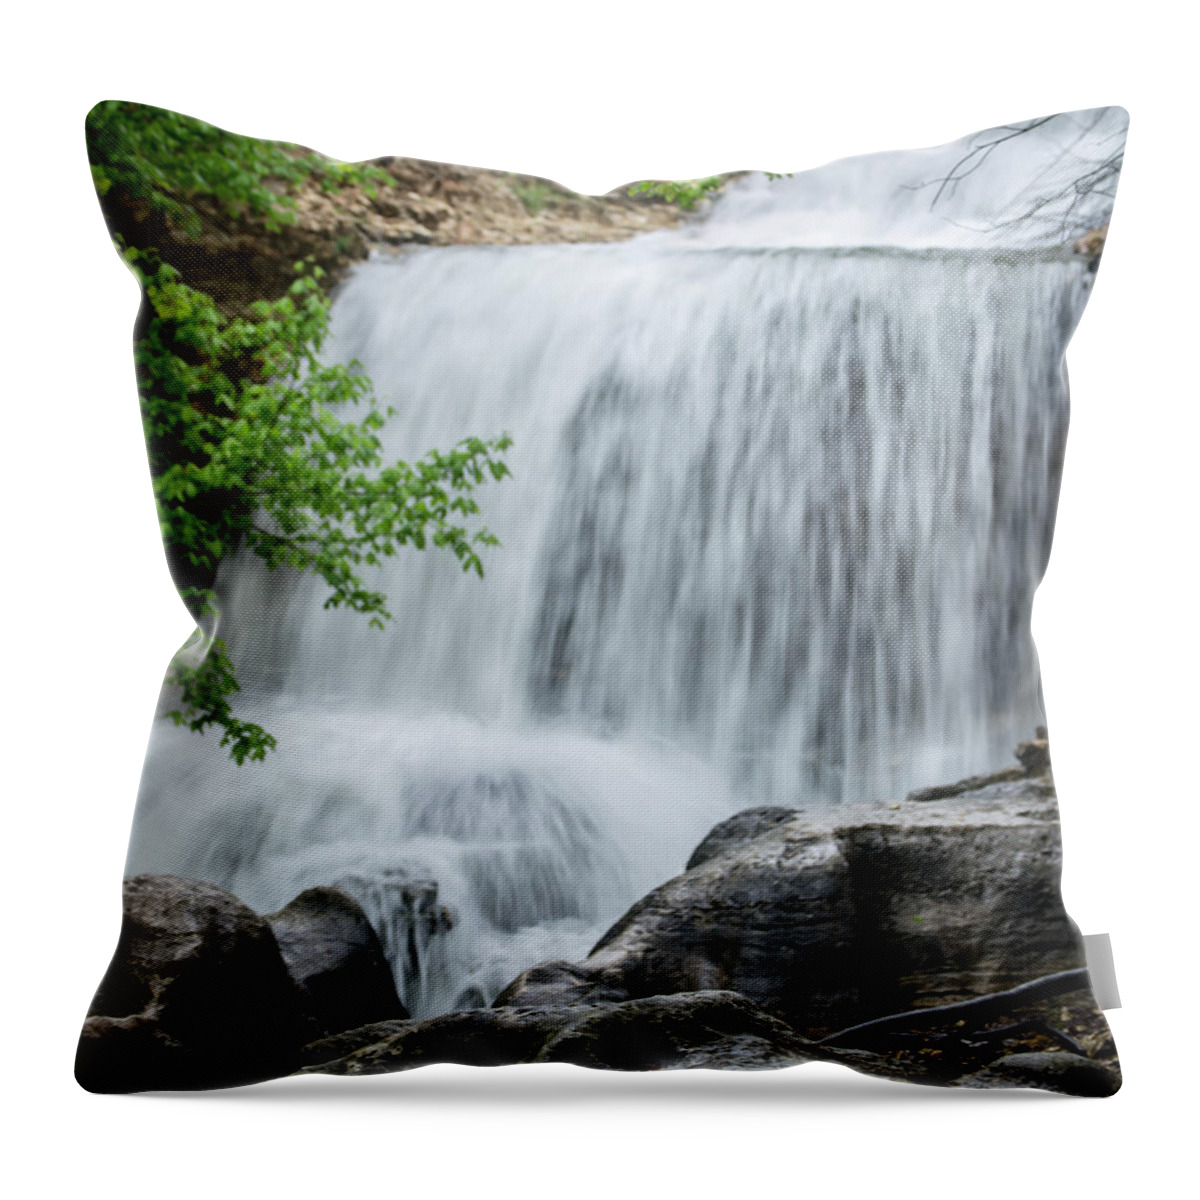 Fall Throw Pillow featuring the photograph Slippery Rocks by Steve Marler